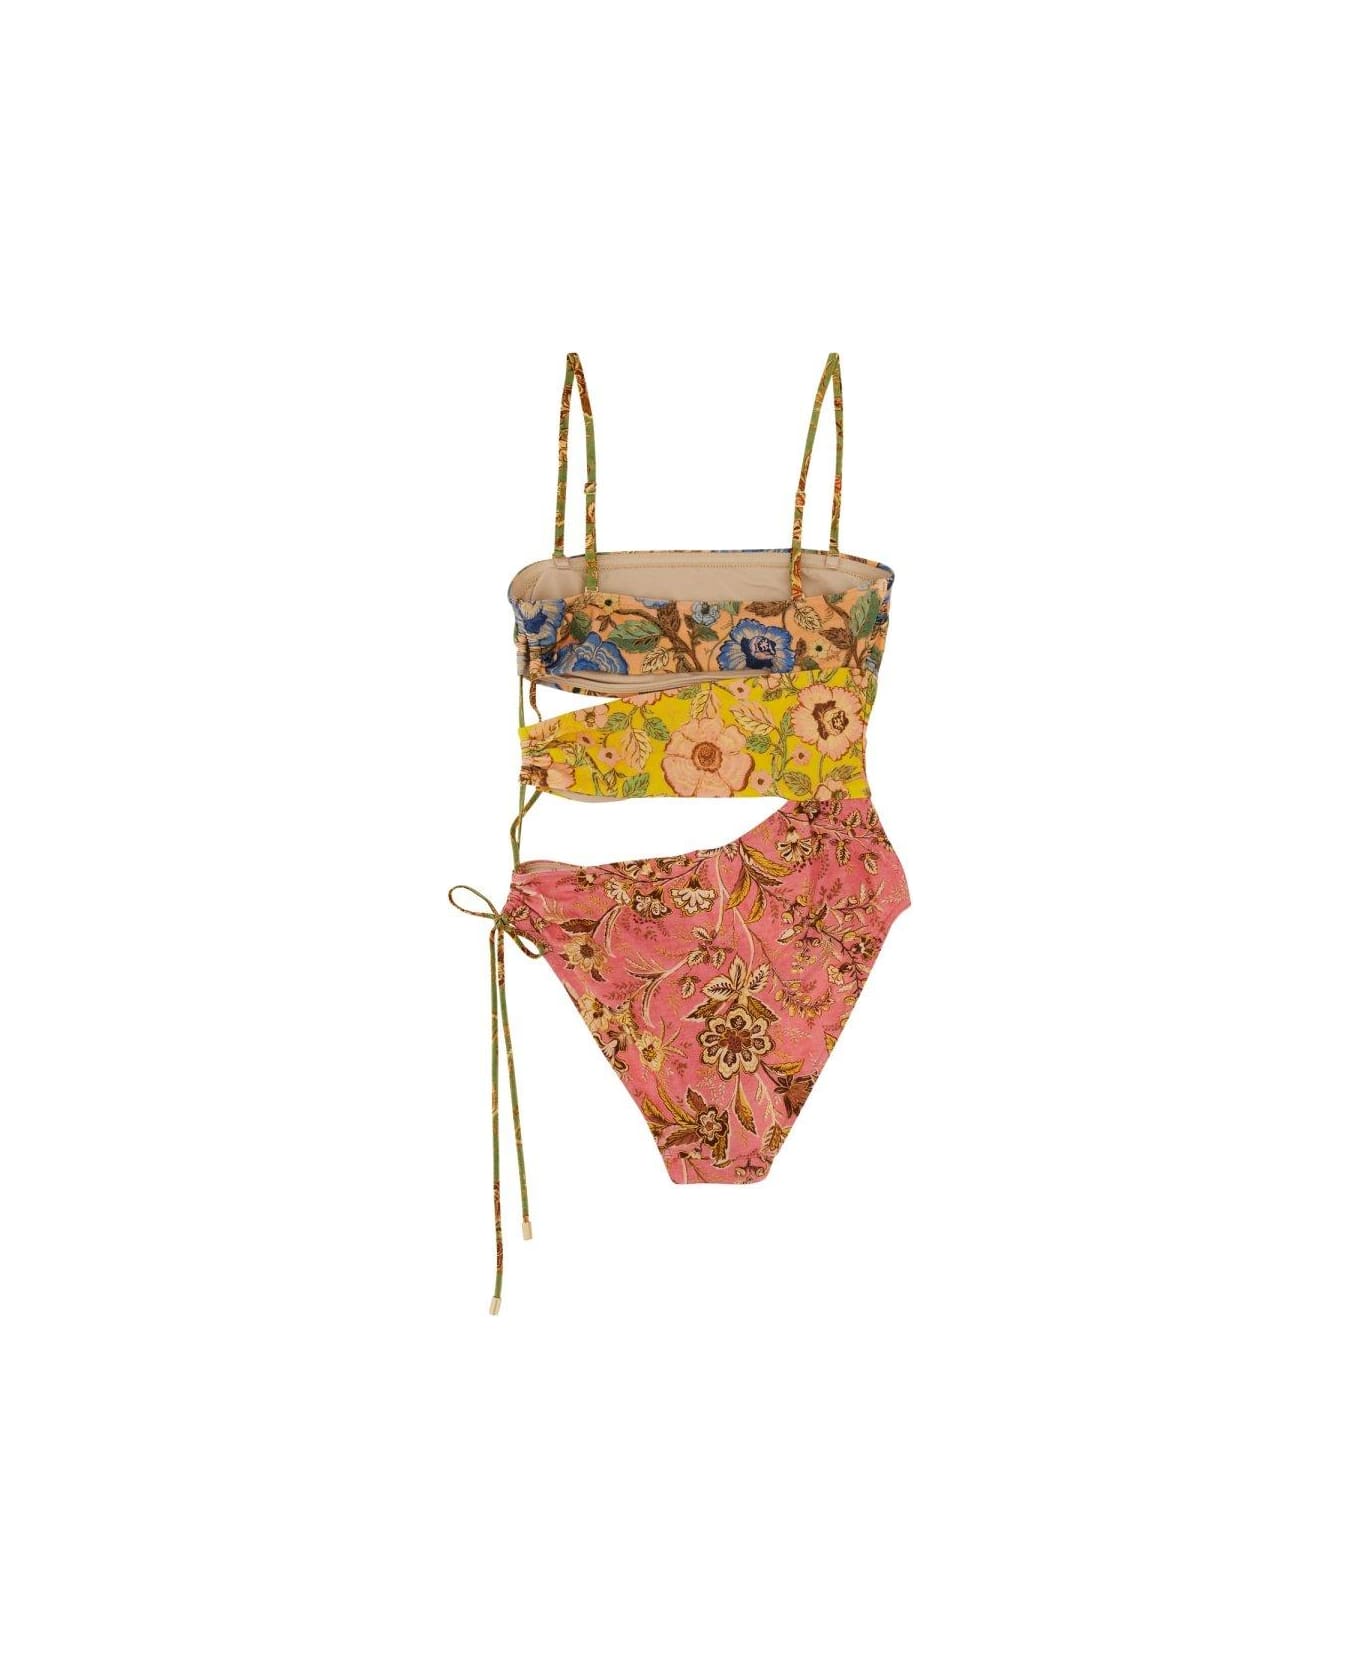 Zimmermann Floral Printed Cut-out One-piece Swimsuit - Spli Spiced 水着